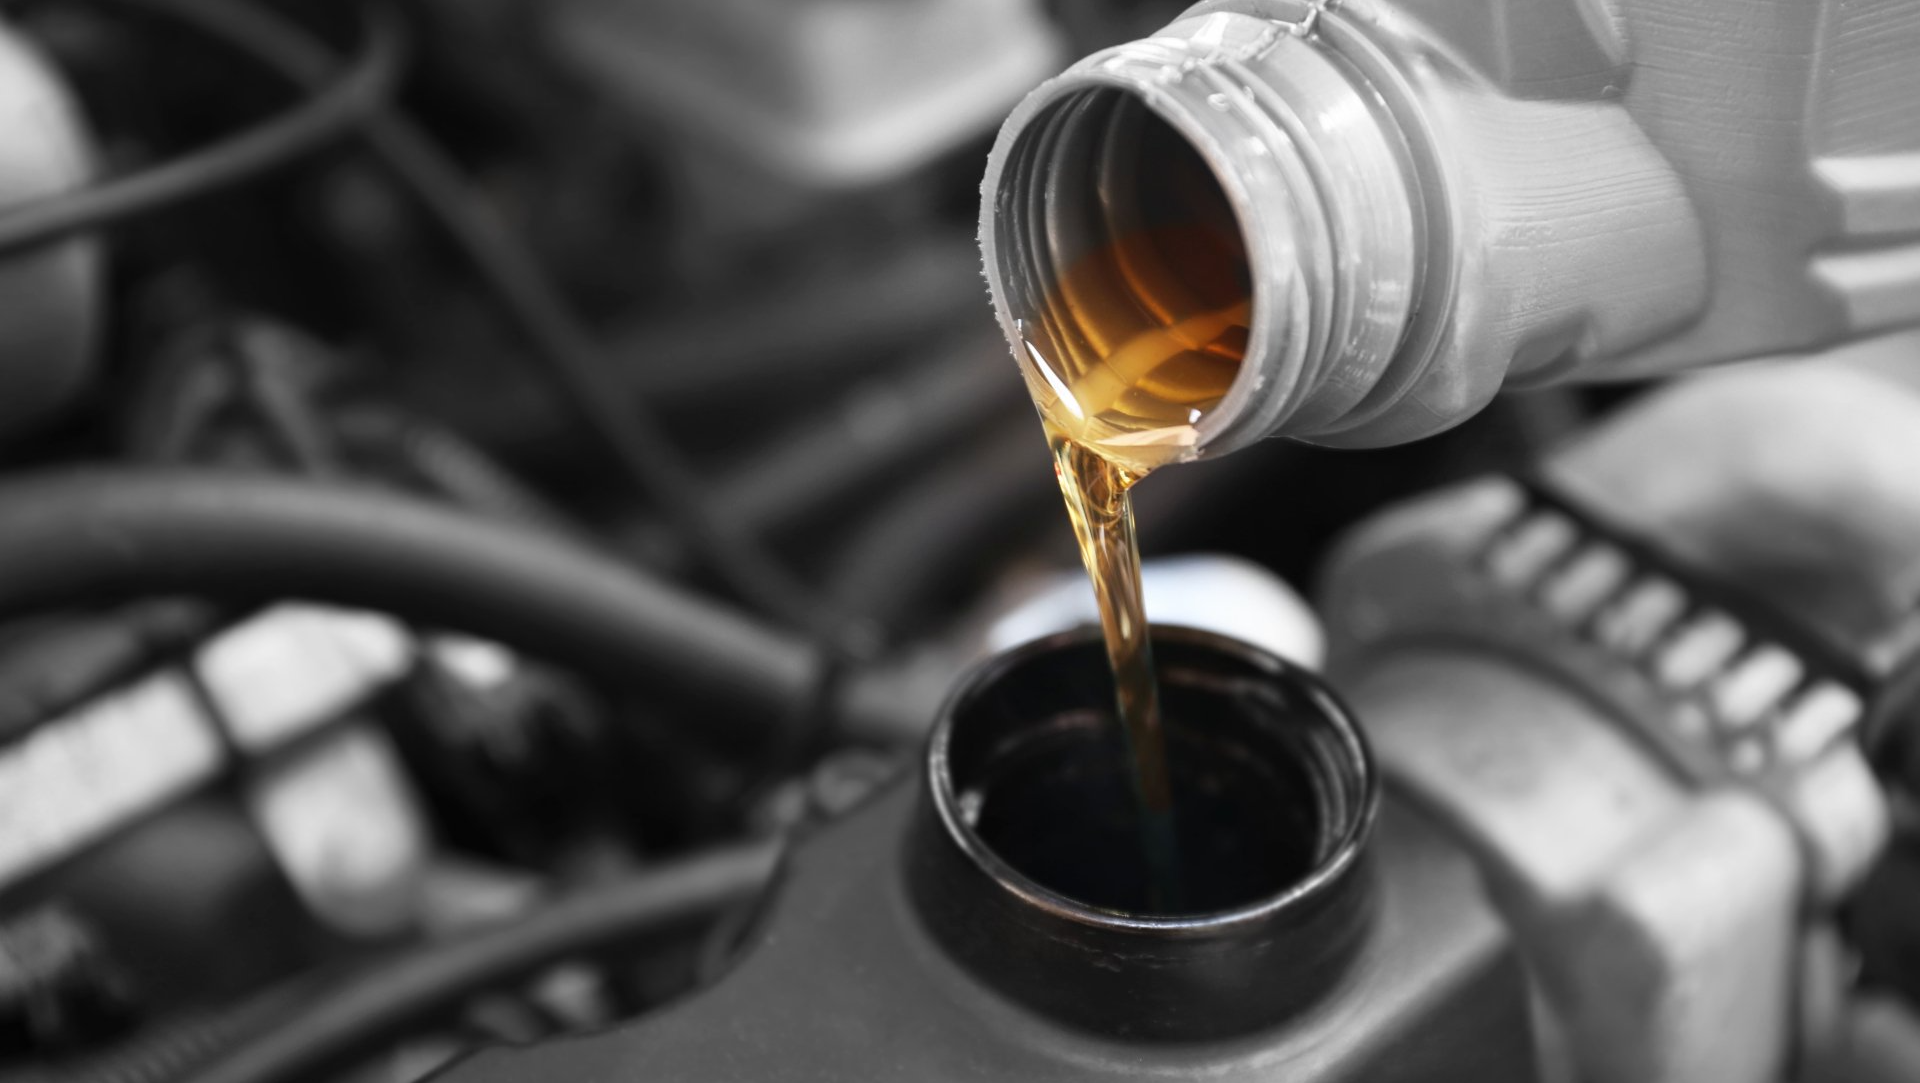 pouring oil in the car engine